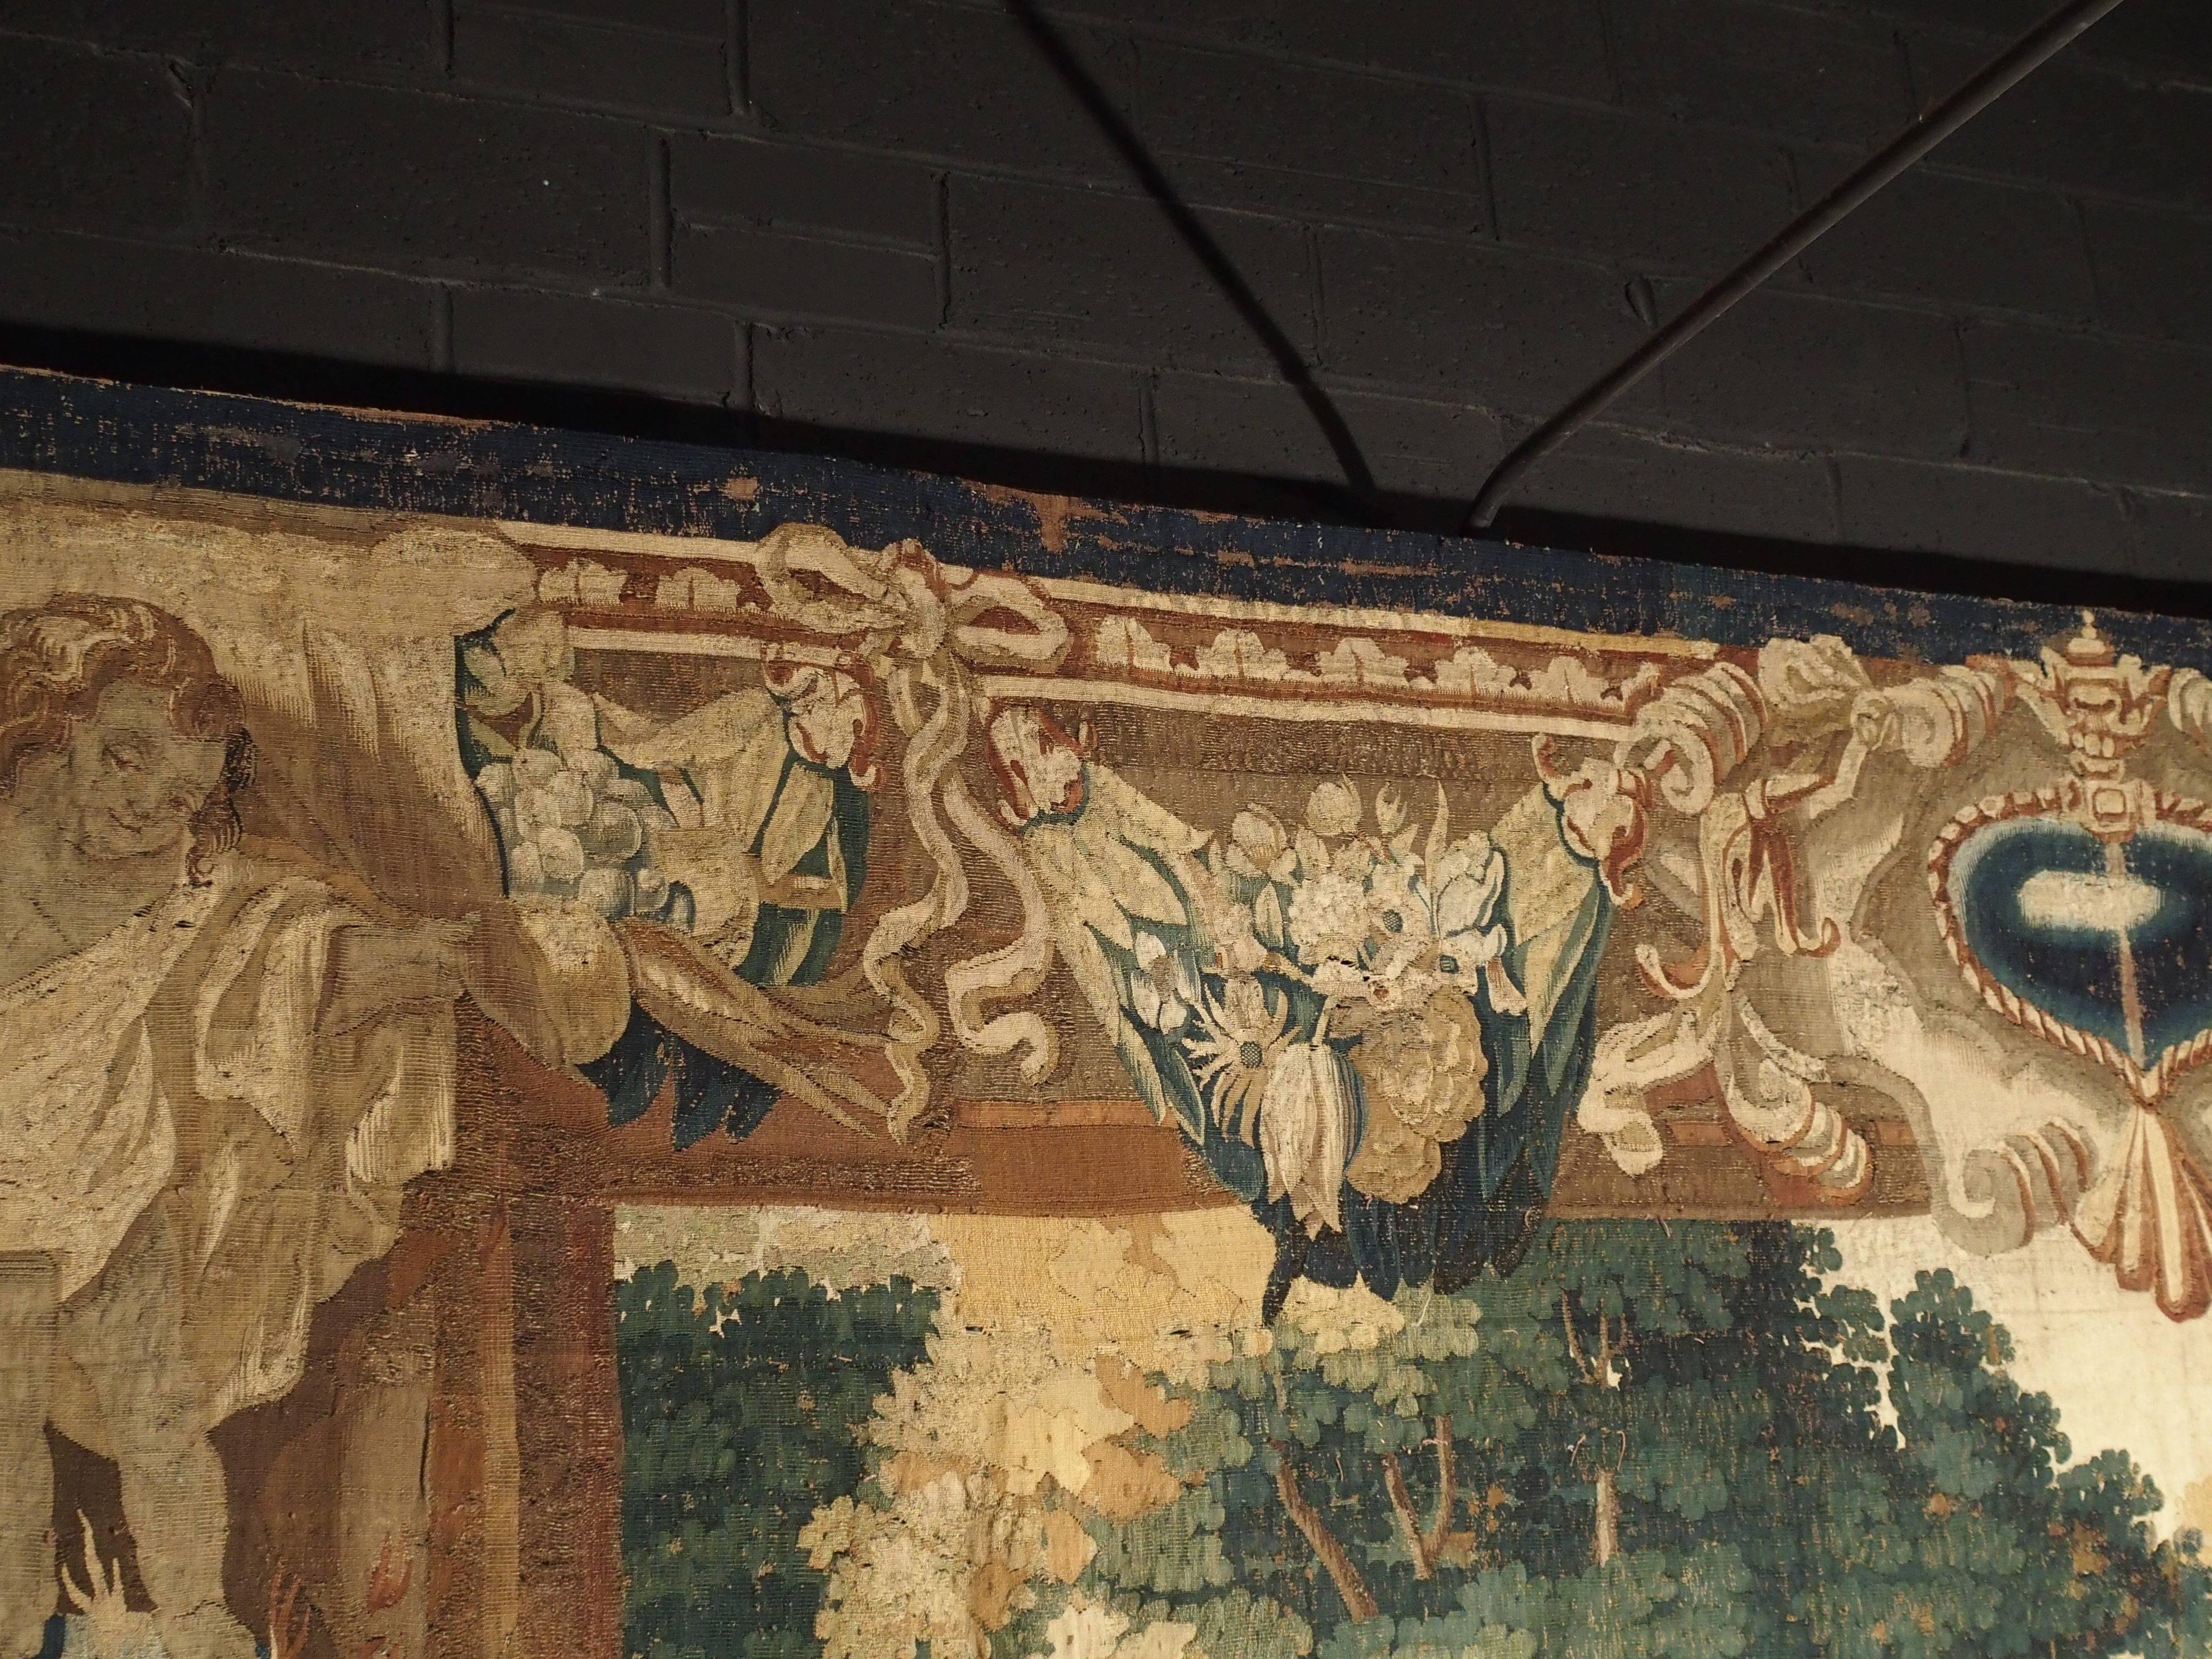 This is a rare Brussels tapestry by the well-known maker, Ian Van Leefdael, circa 1640. On the lower right border, we see his signature, along with a B B, which signifies Brabant Brussels. In 1528, it became a requirement for workshops to weave in